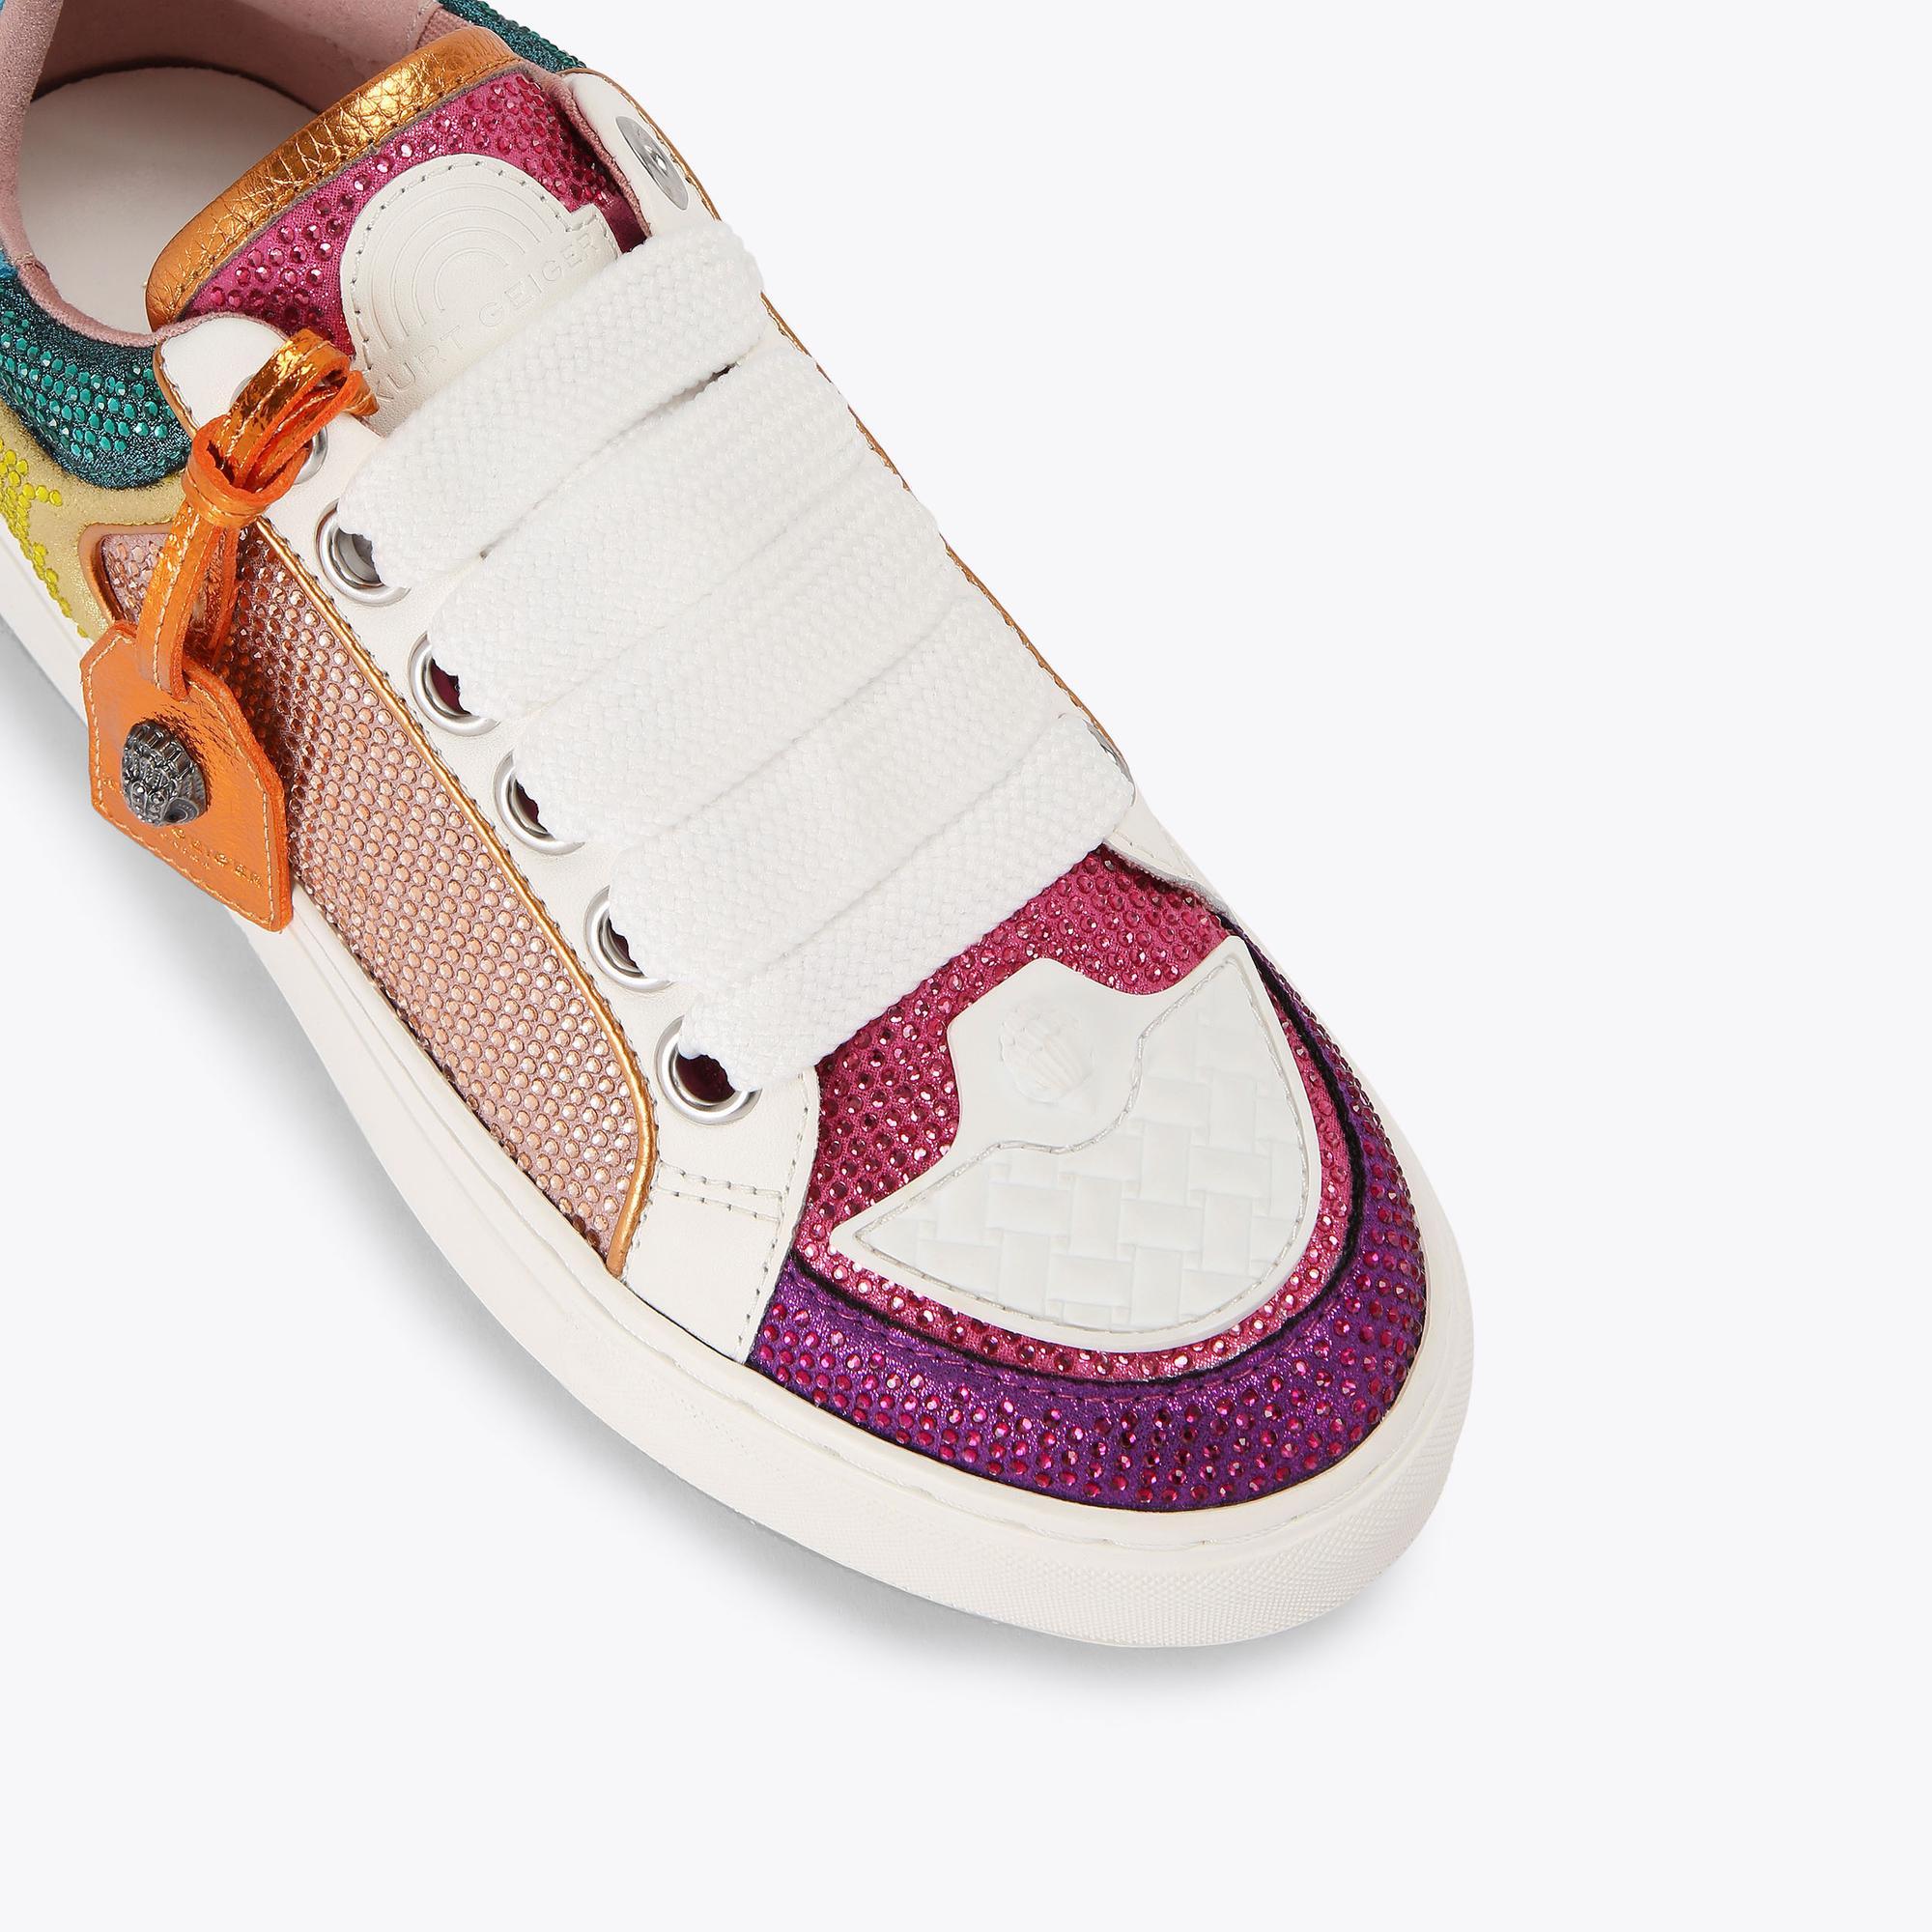 SOUTHBANK TAG Rainbow Sneakers by KURT GEIGER LONDON